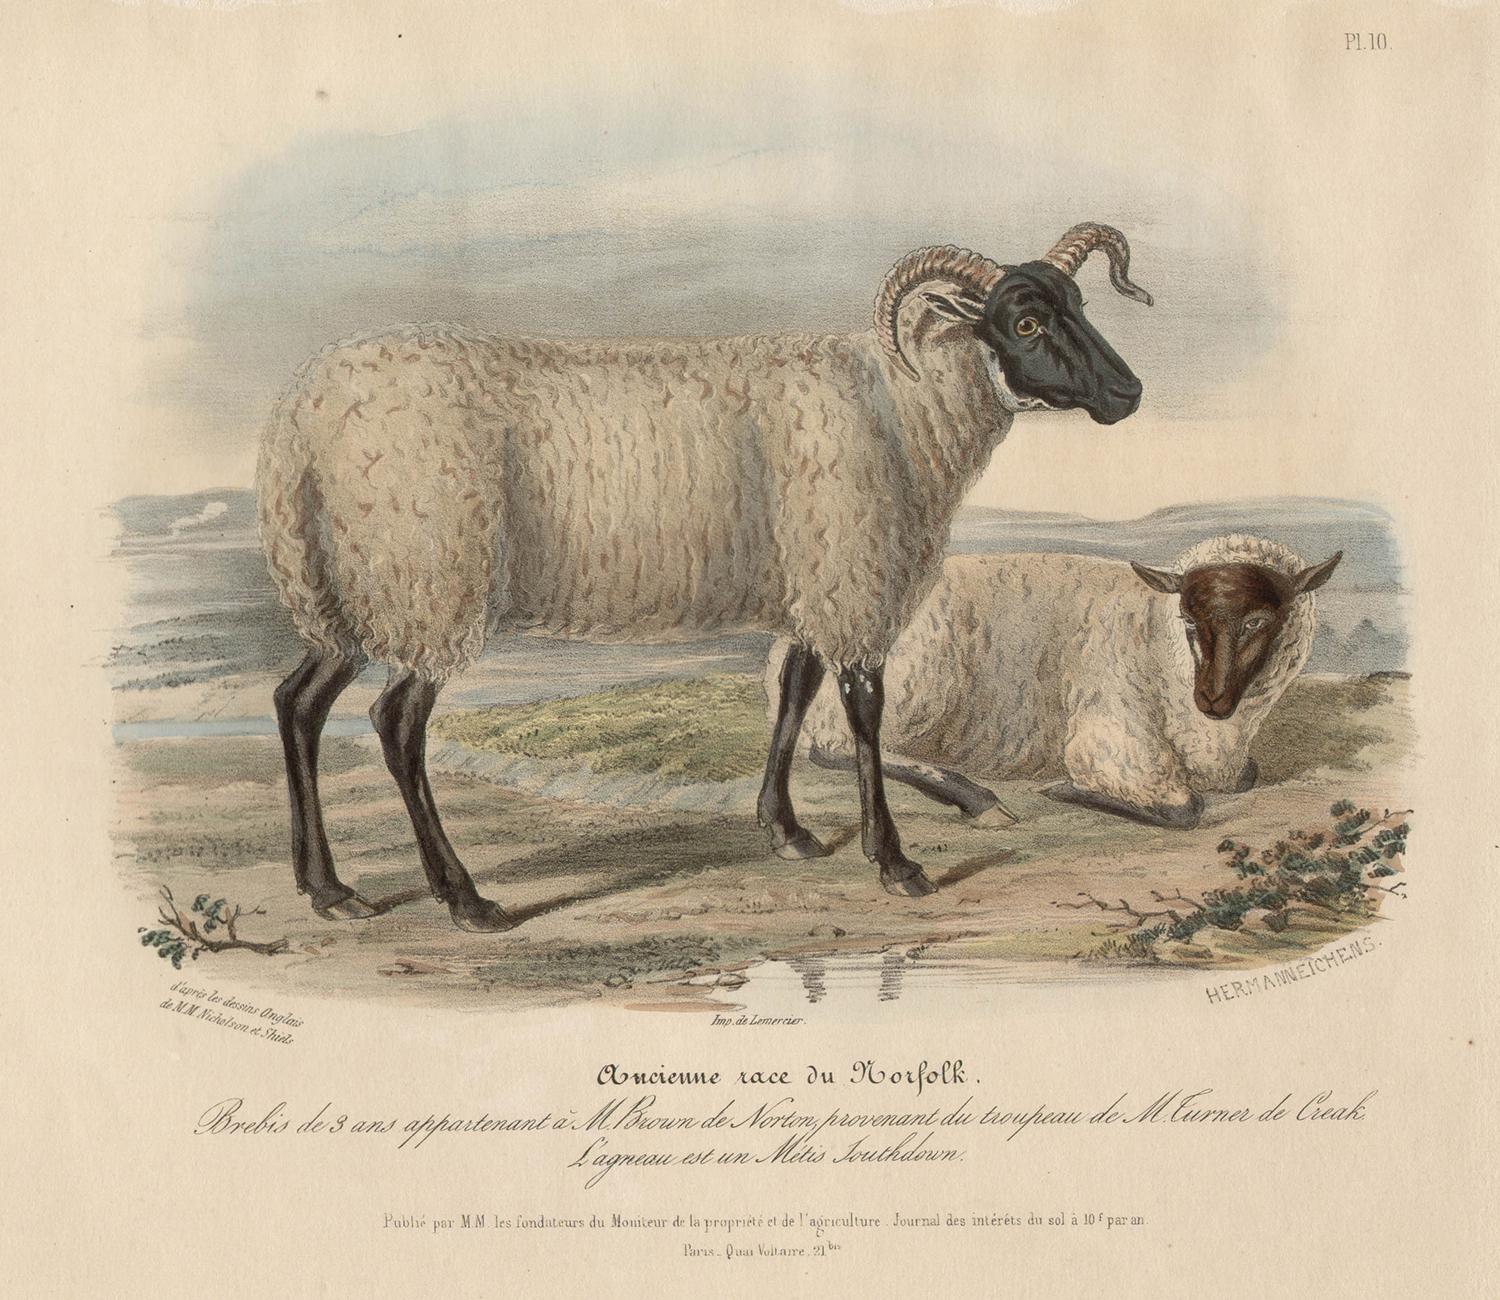 After William Shiels Animal Print - Old Norfolk Breed, sheep lithograph with original hand-colouring, circa 1845